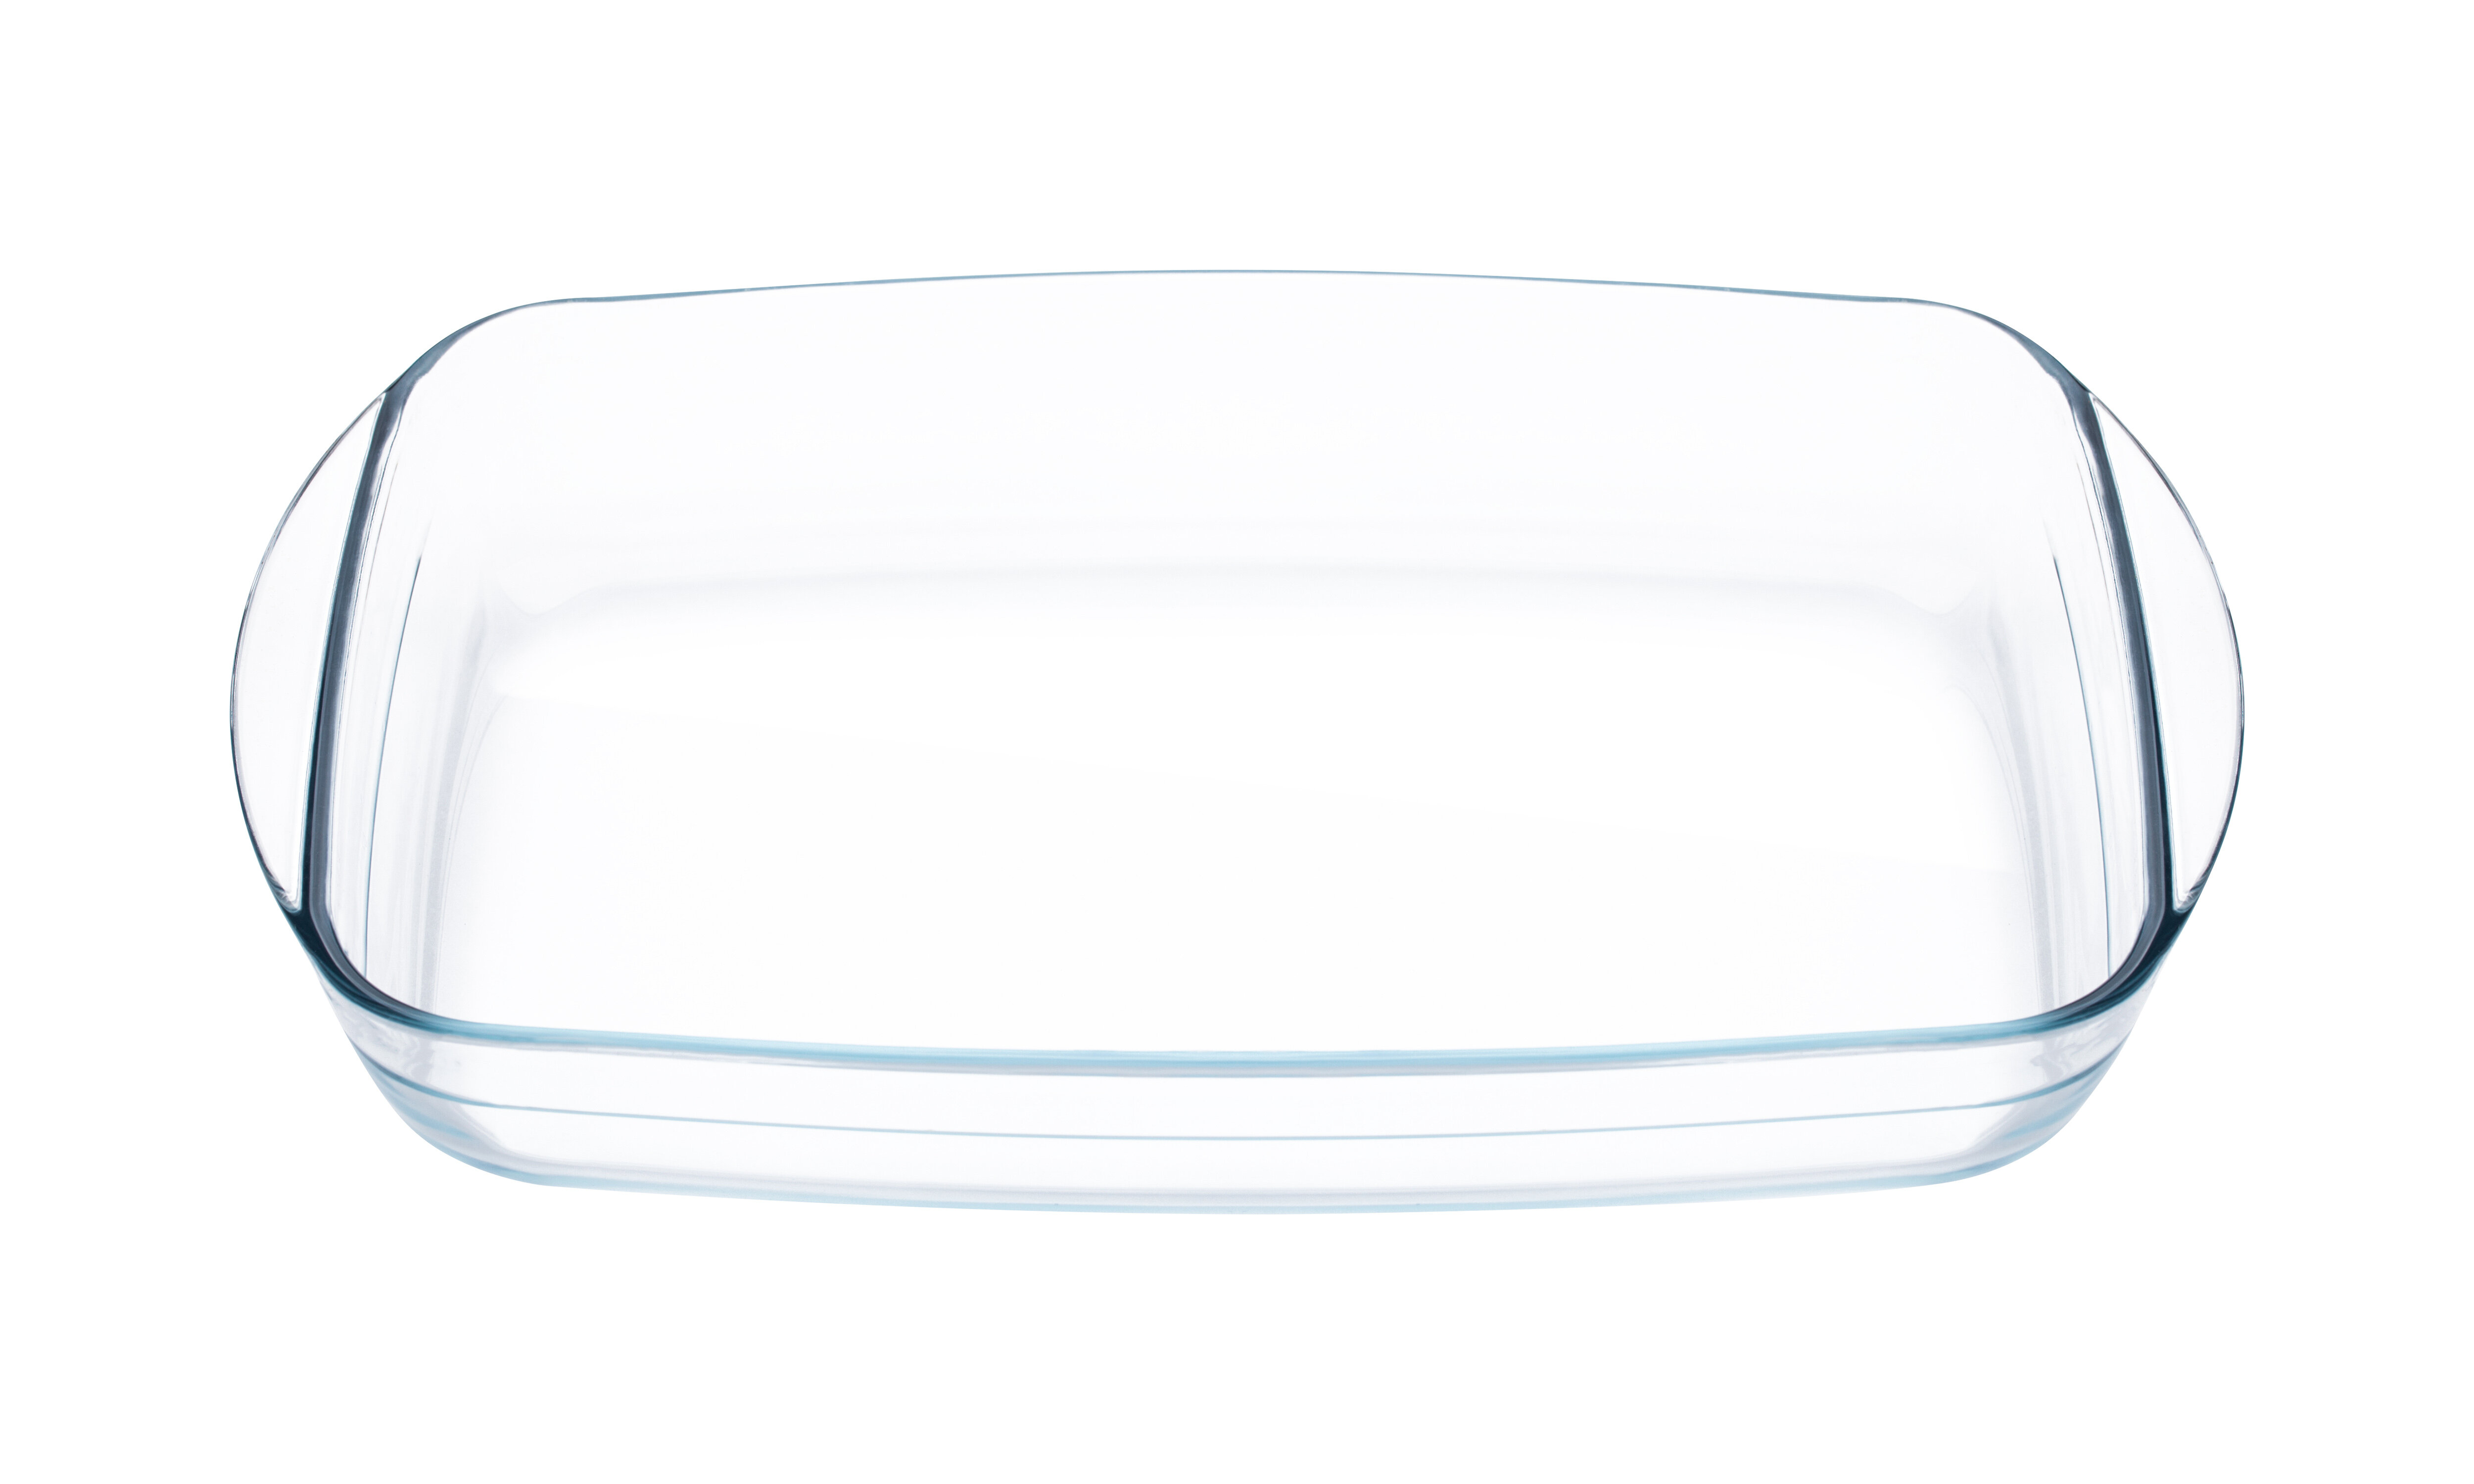  Libbey Baker's Basics Glass Casserole Baking Dish with Cover,  2-quart: Home & Kitchen